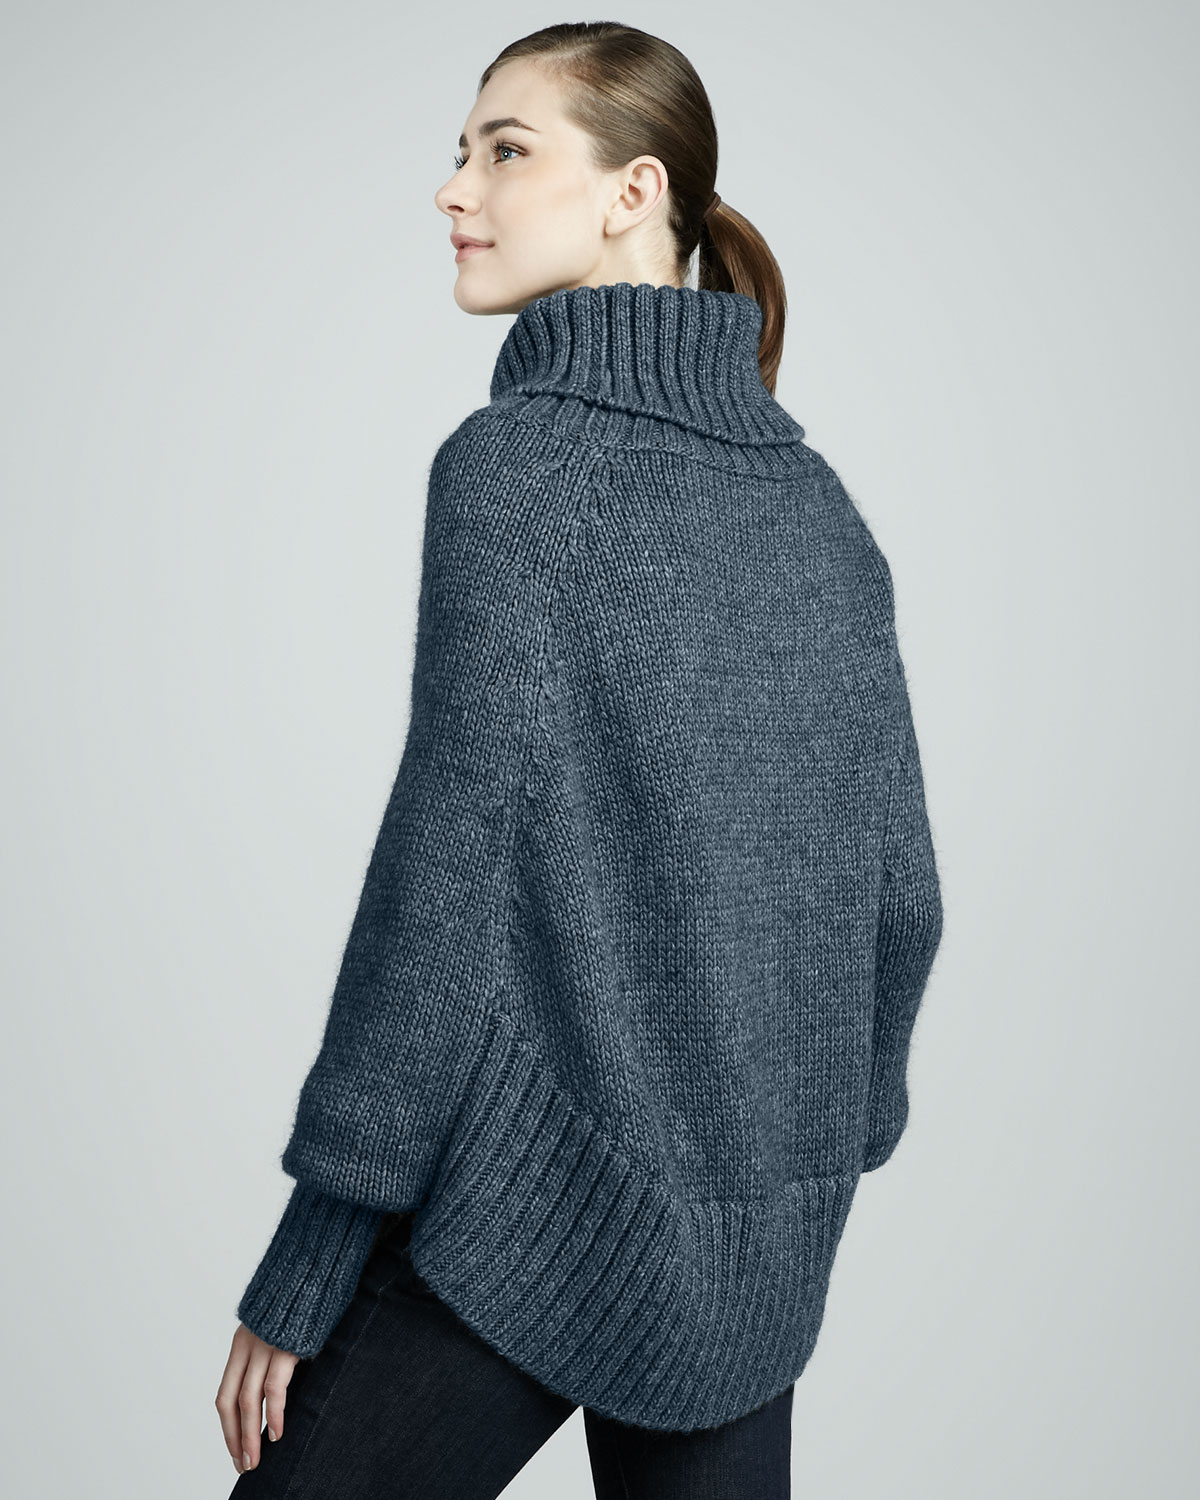 Lyst - Portolano Poncho with Sleeves in Blue